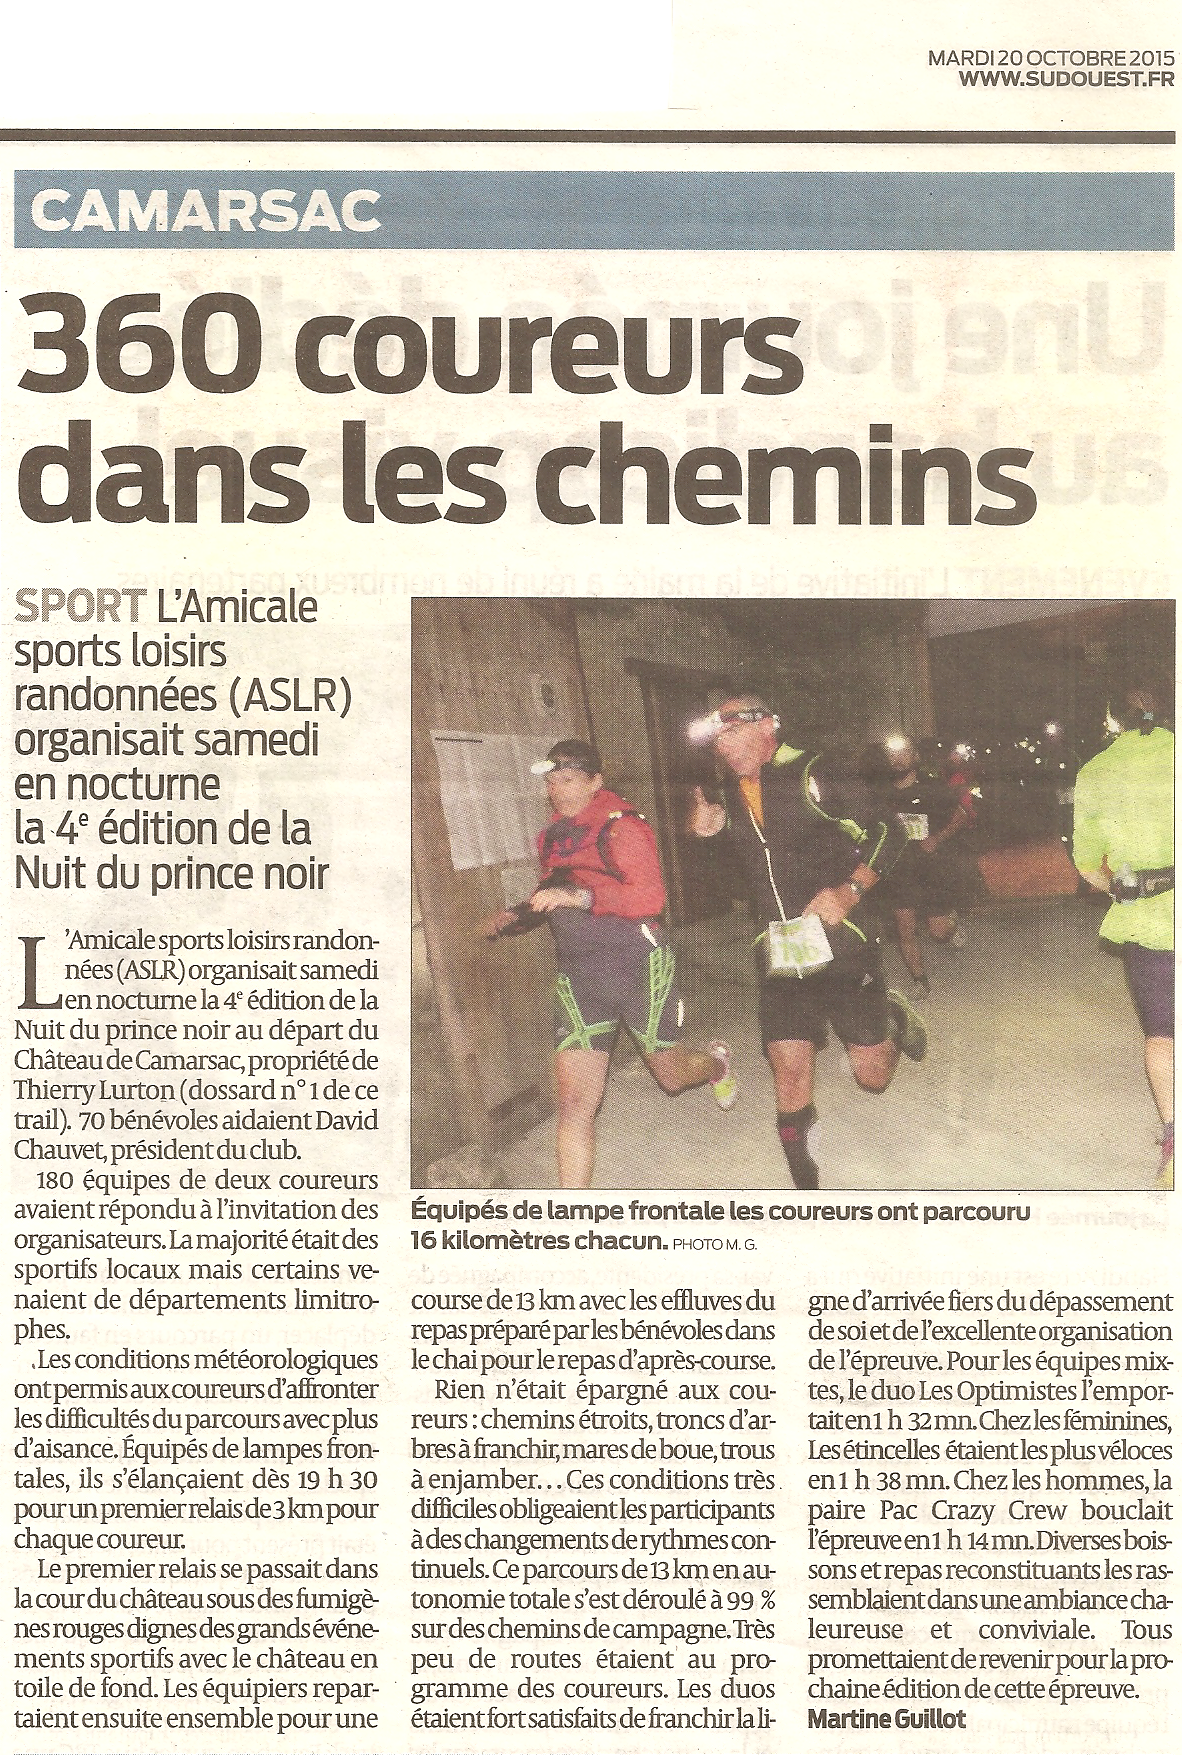 Article Sud-Ouest 2015